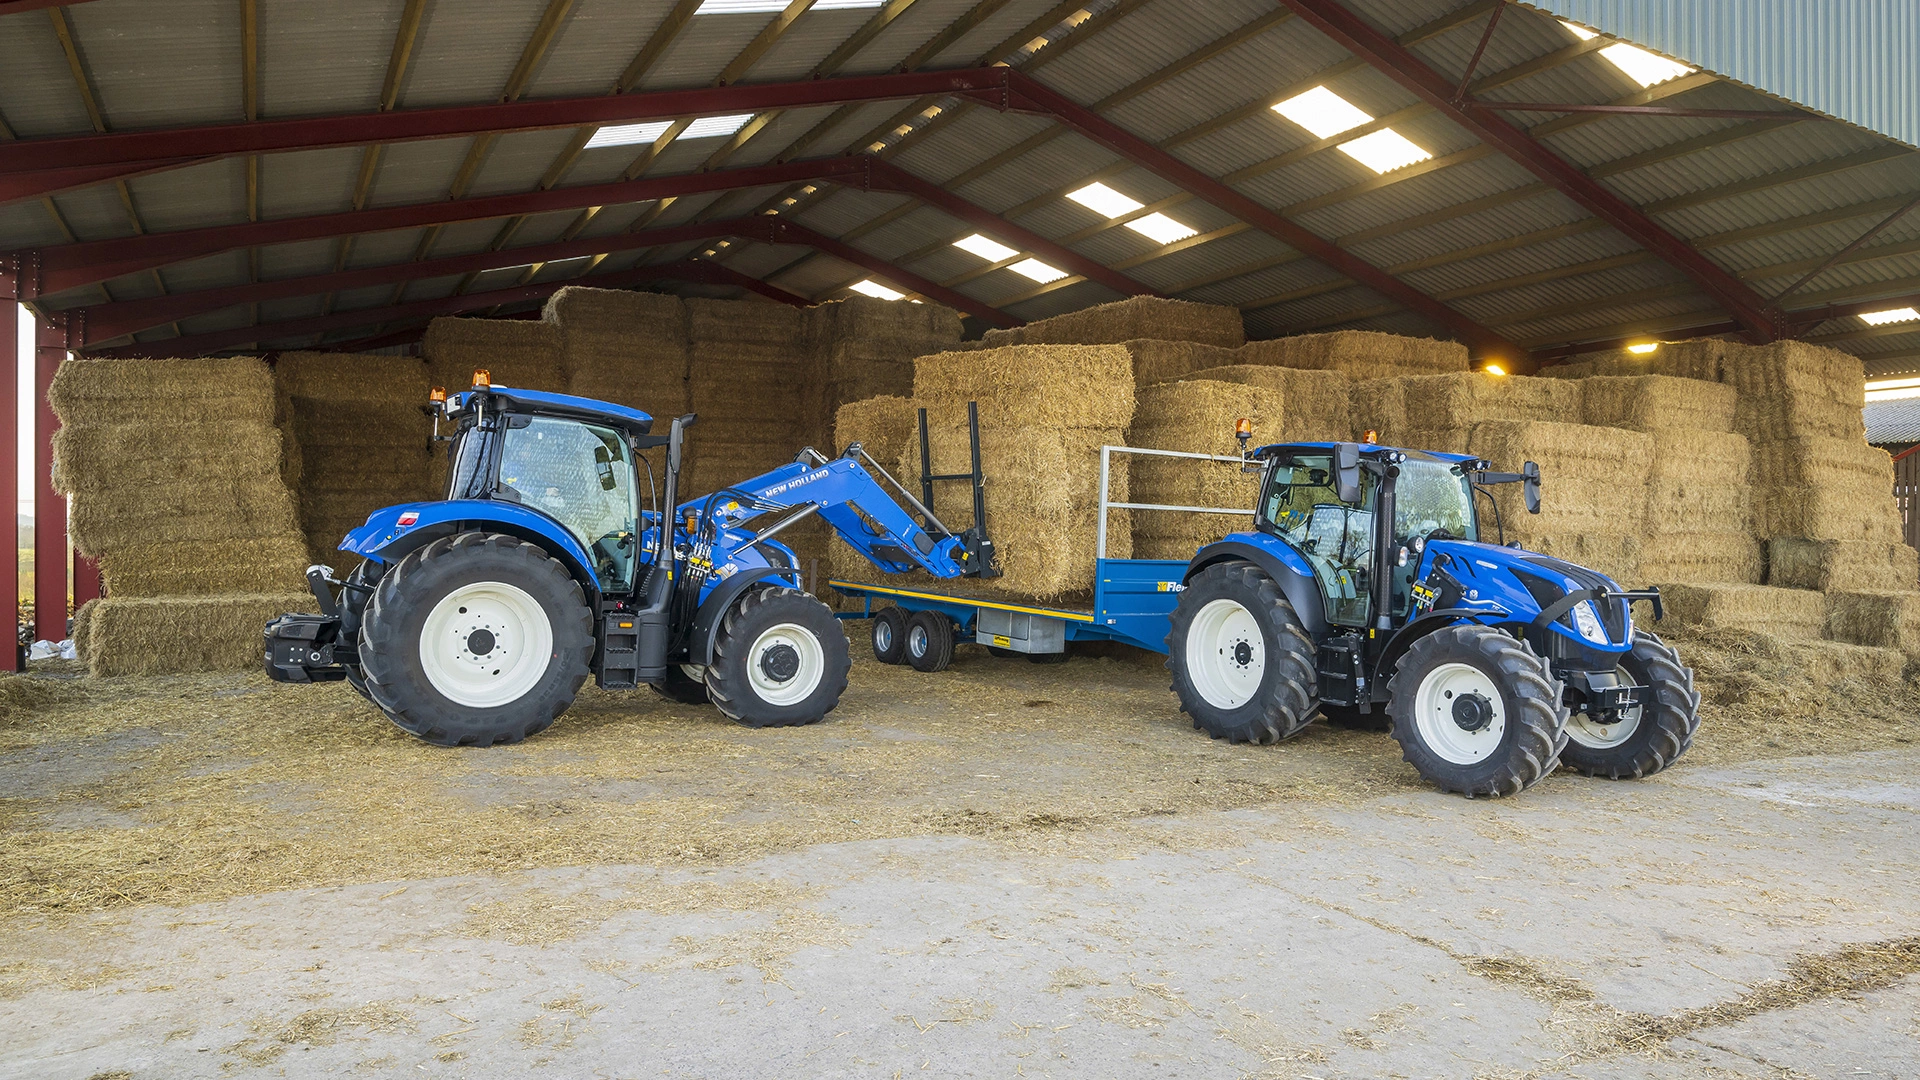 New Holland tractors in a barn, one with a front loader lifting straw bales onto a trailer.